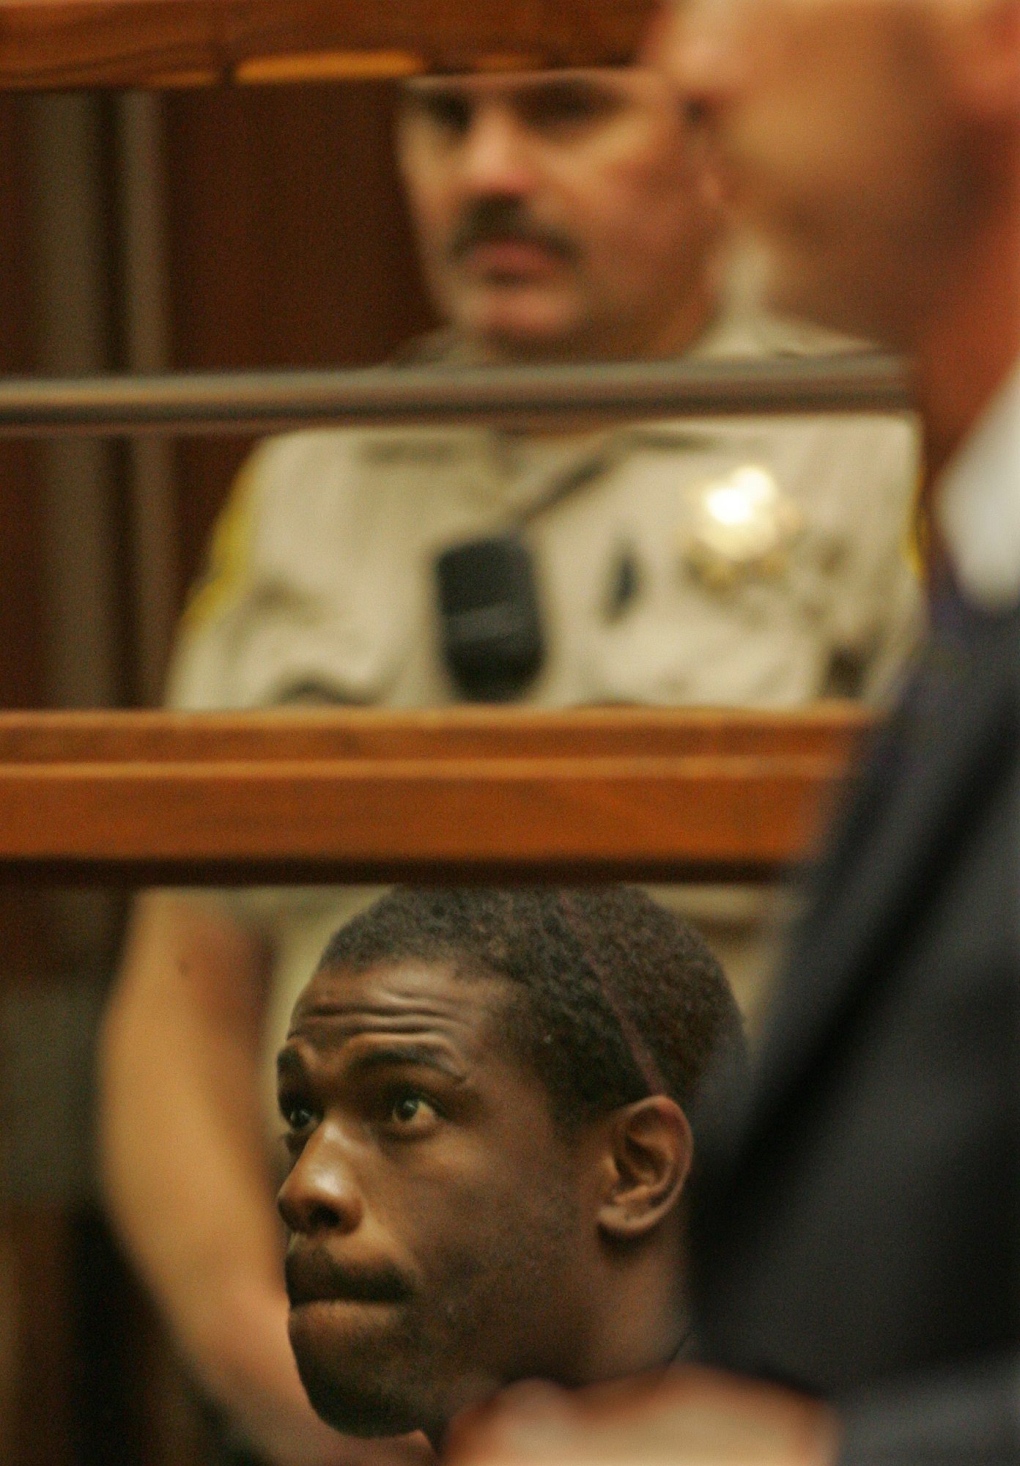 Former NFL player Lawrence Phillips in court